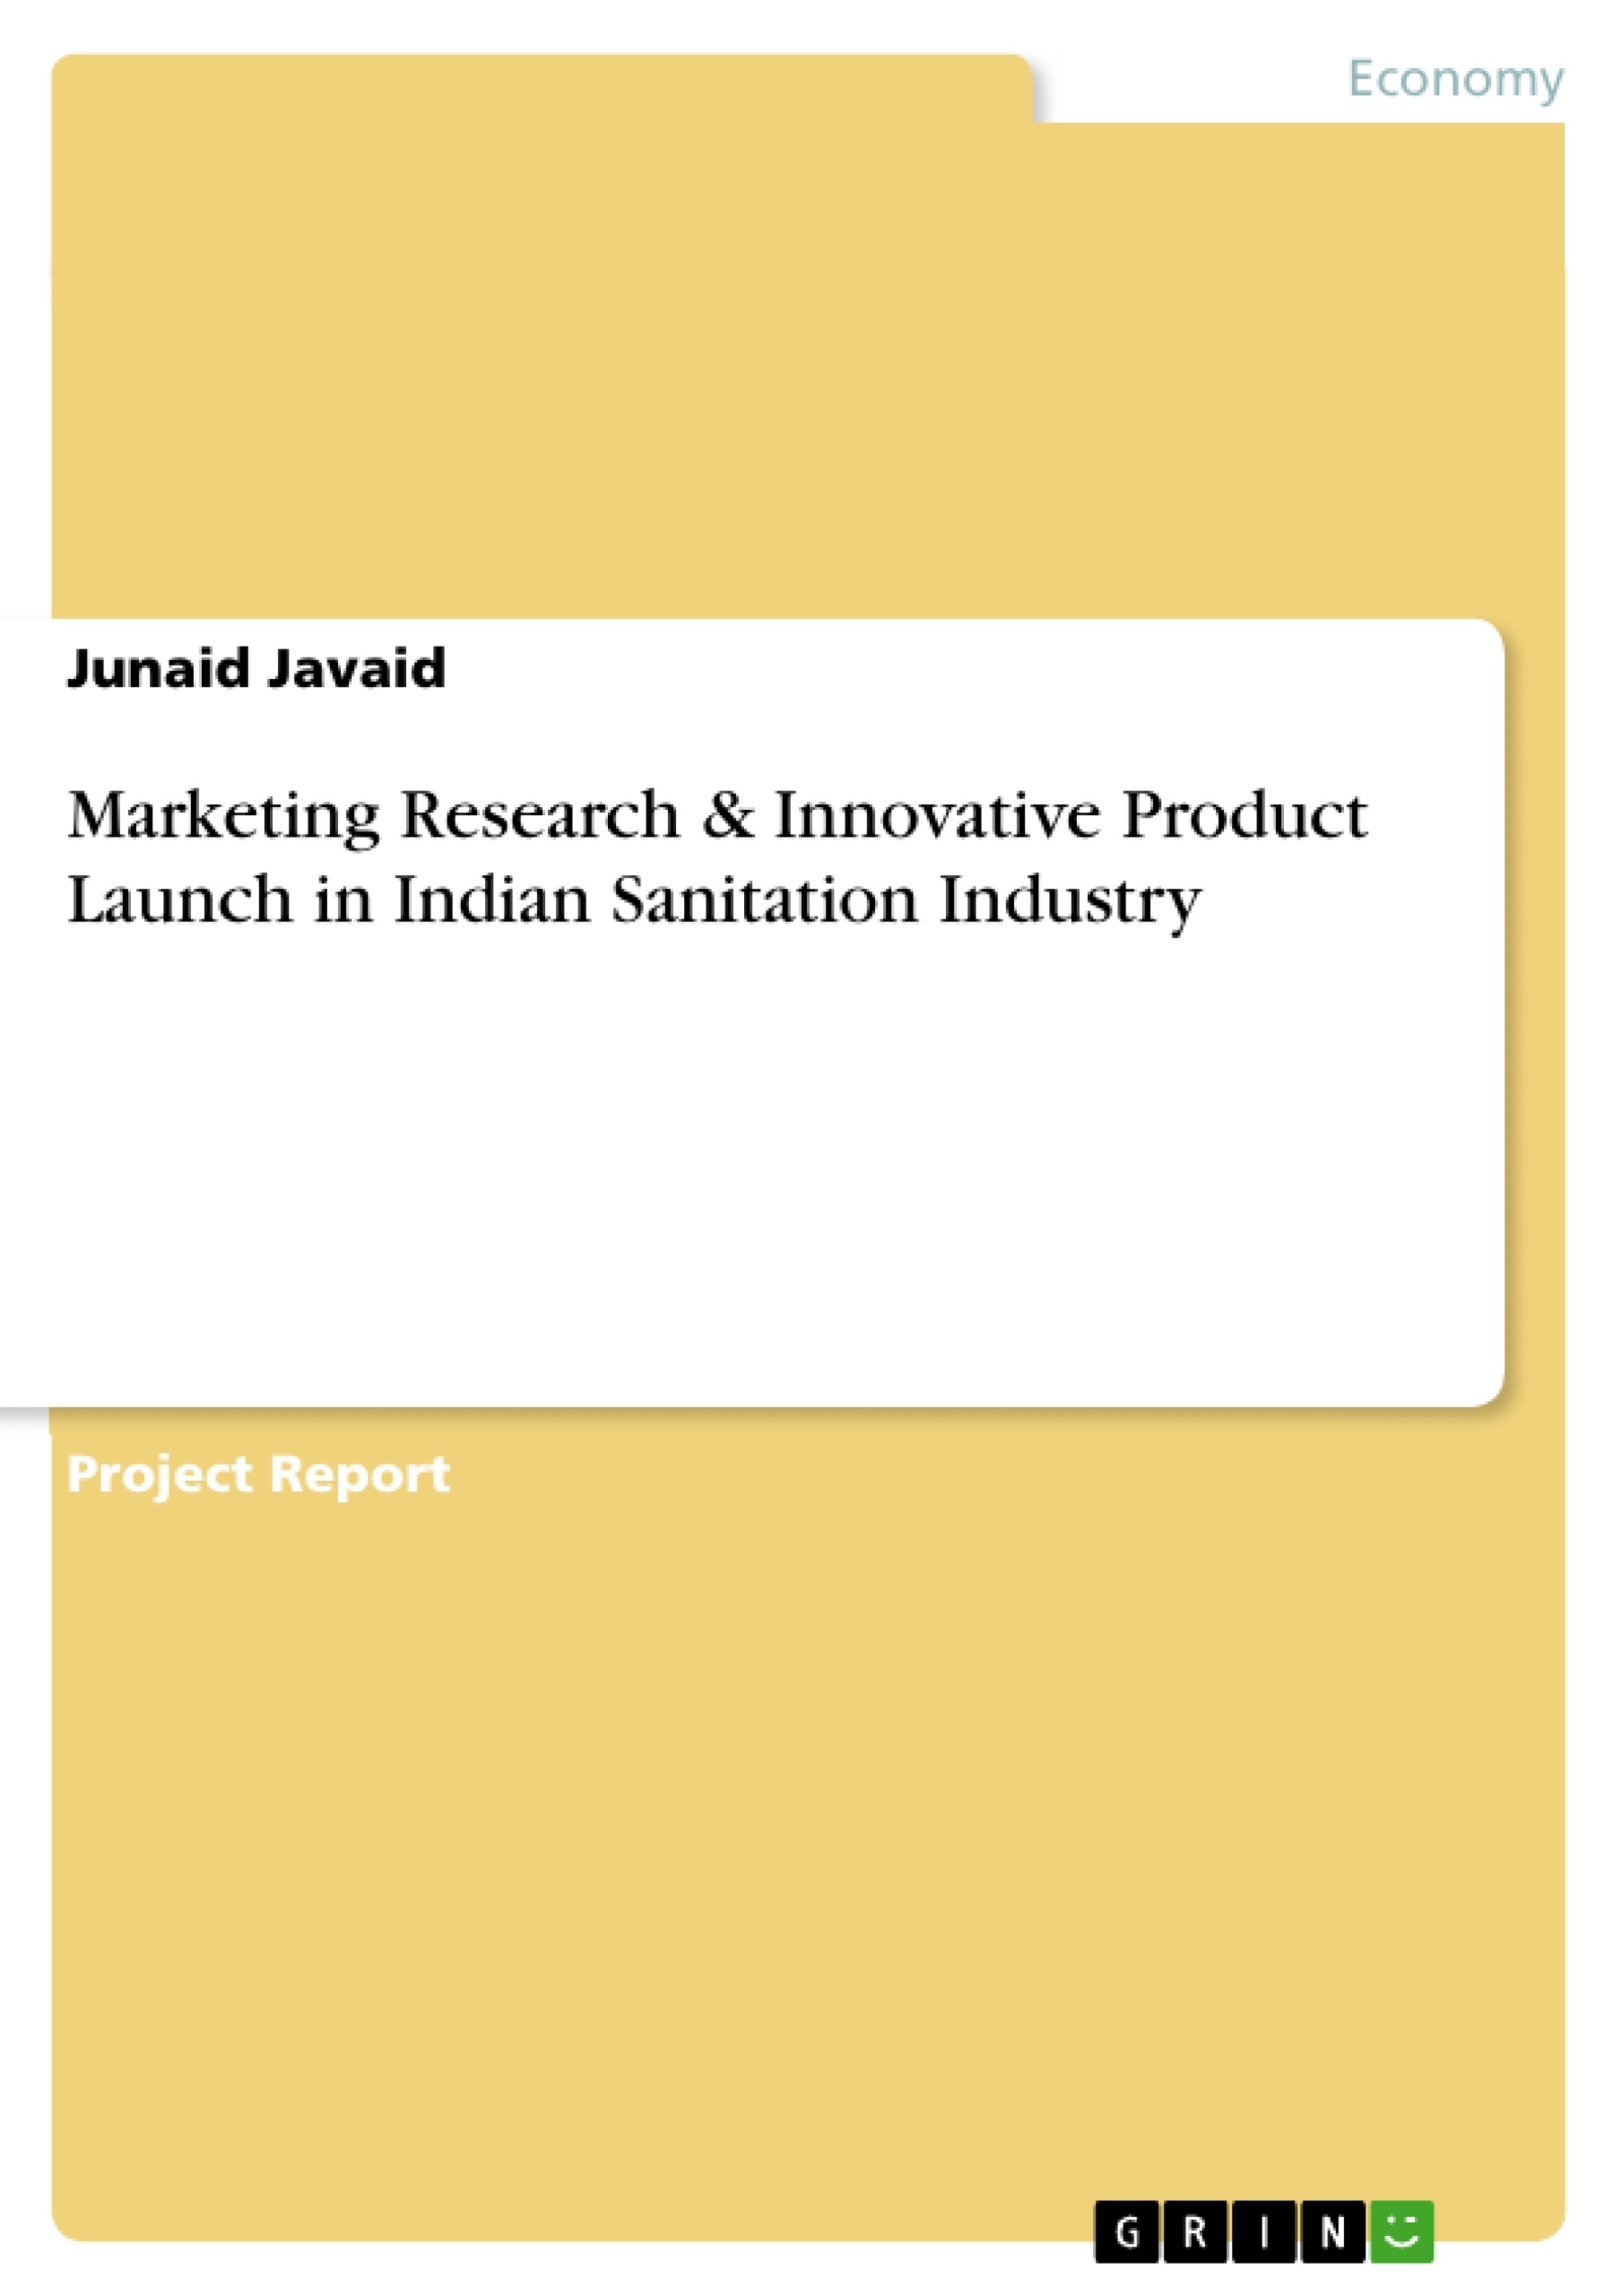 Título: Marketing Research & Innovative Product Launch in Indian Sanitation Industry